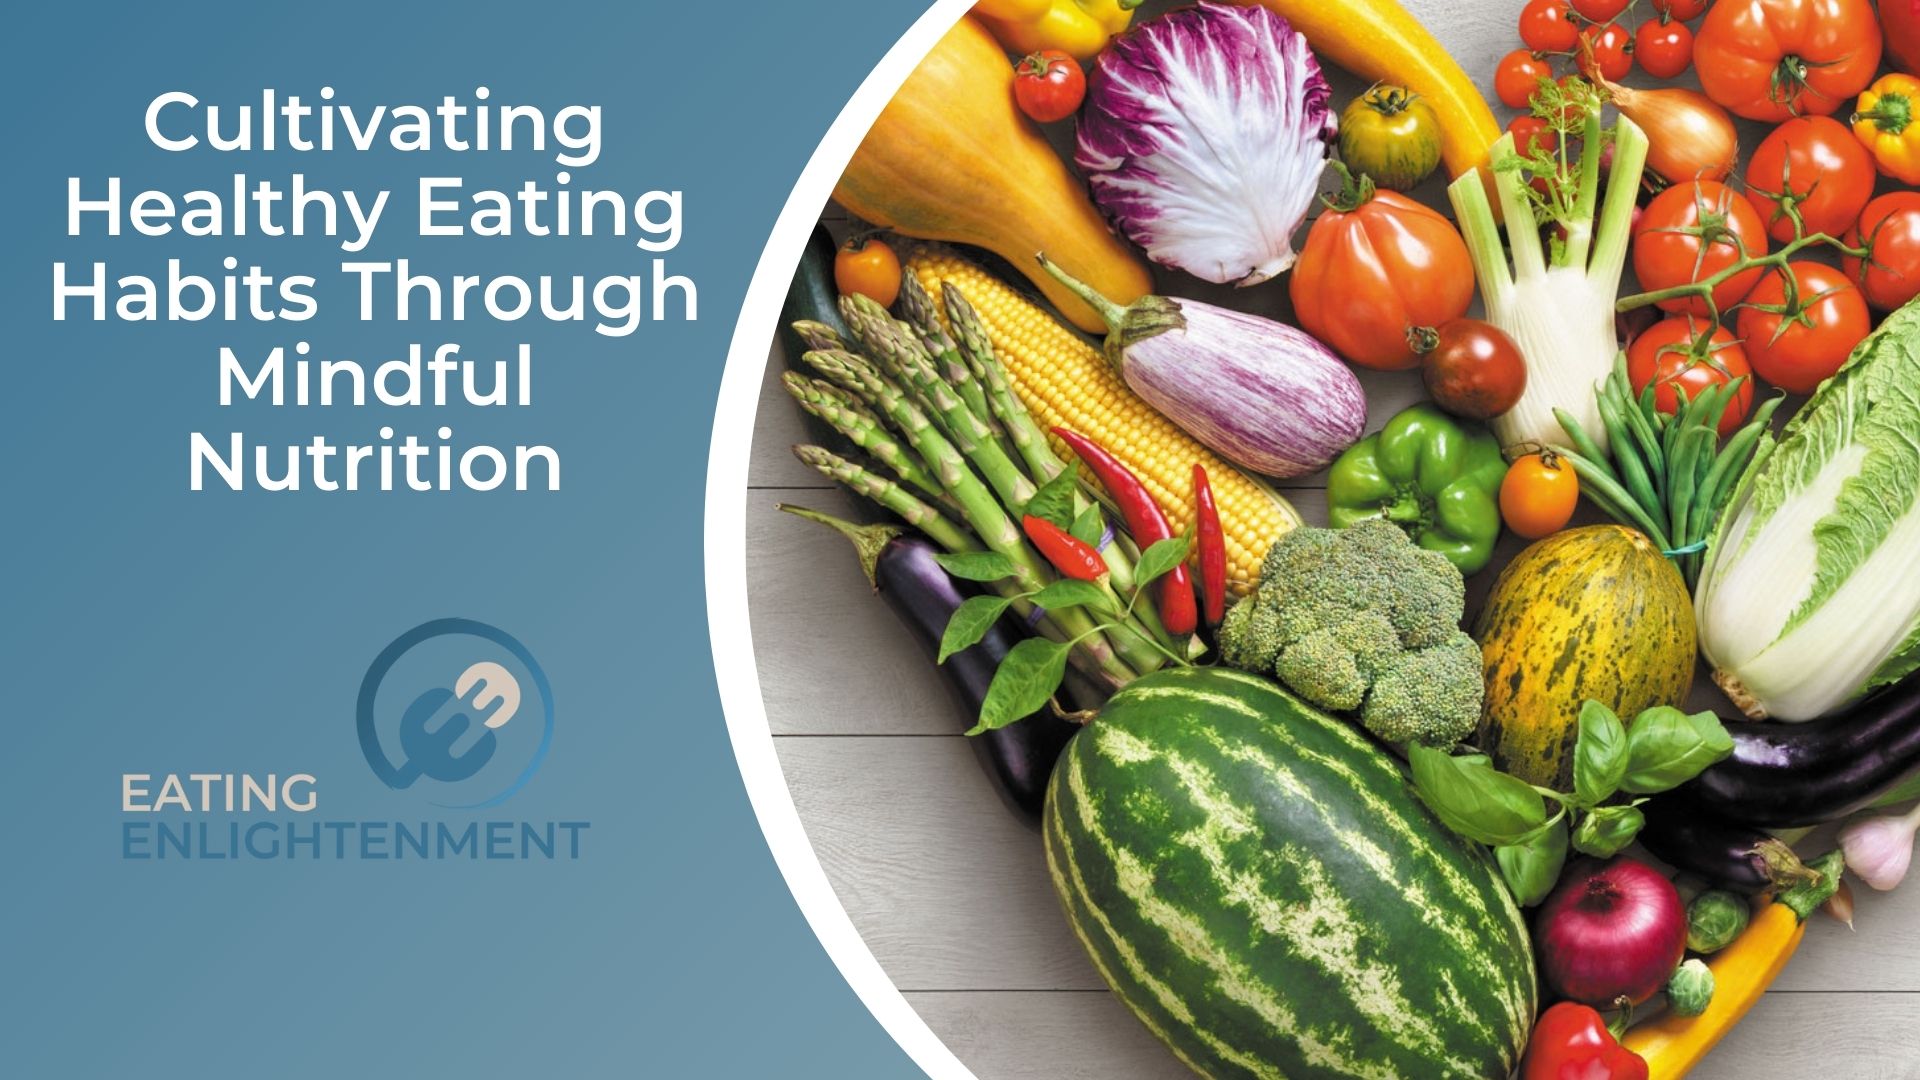 Cultivating Healthy Eating Habits Through Mindful Nutrition